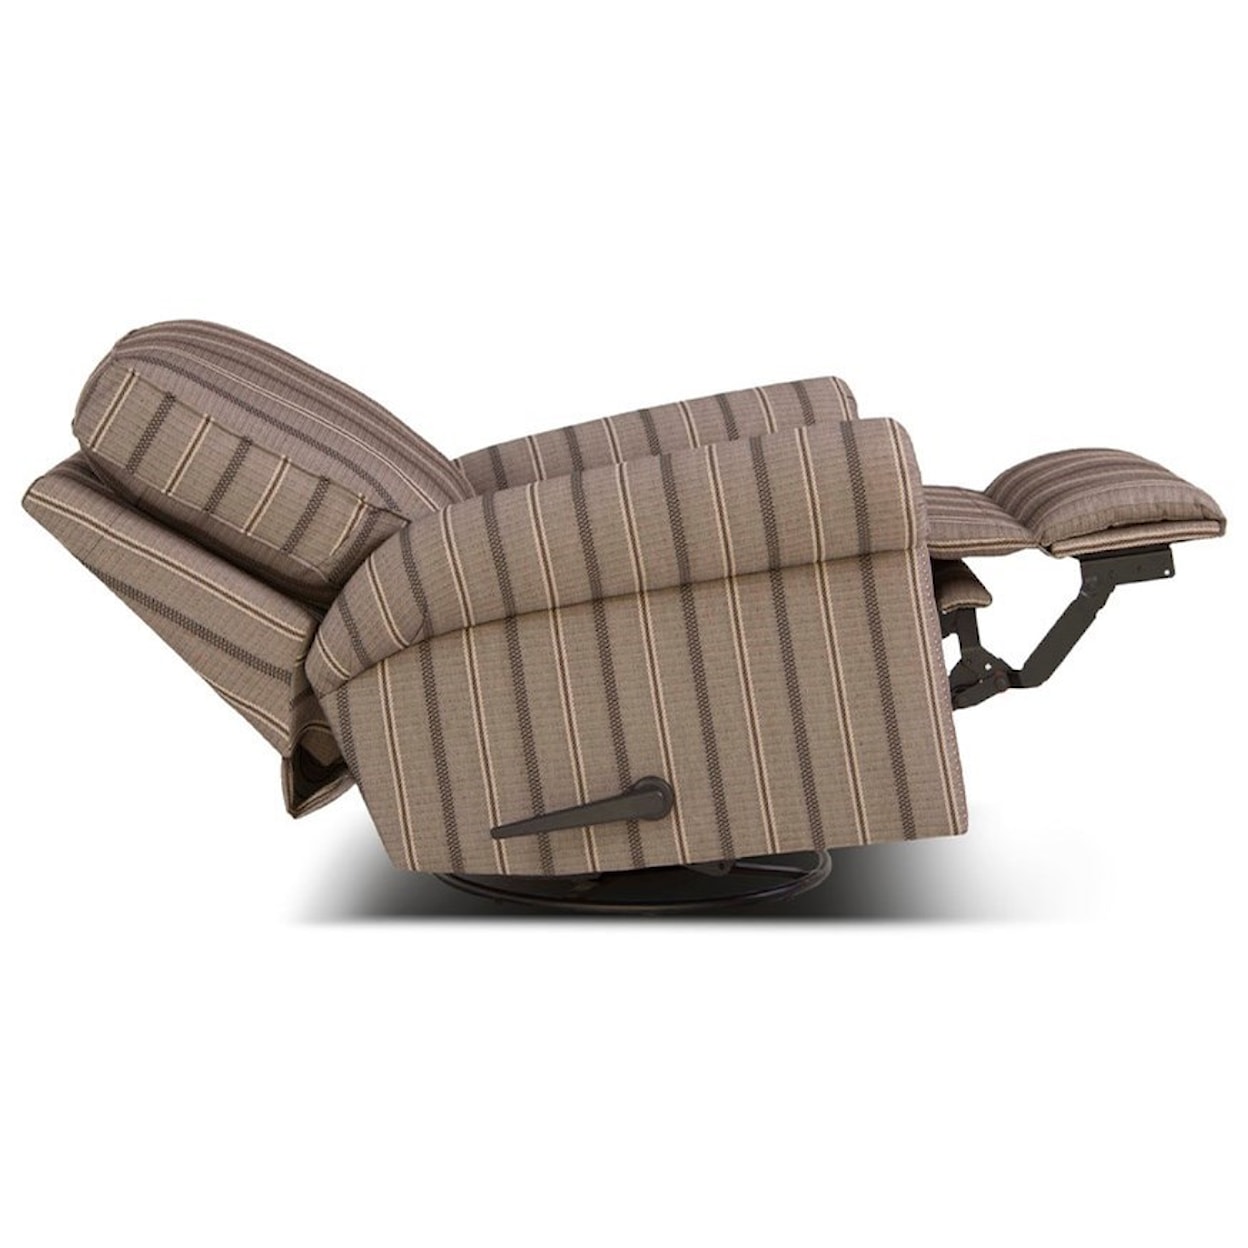 Smith Brothers 416 Motorized Recliner Chair